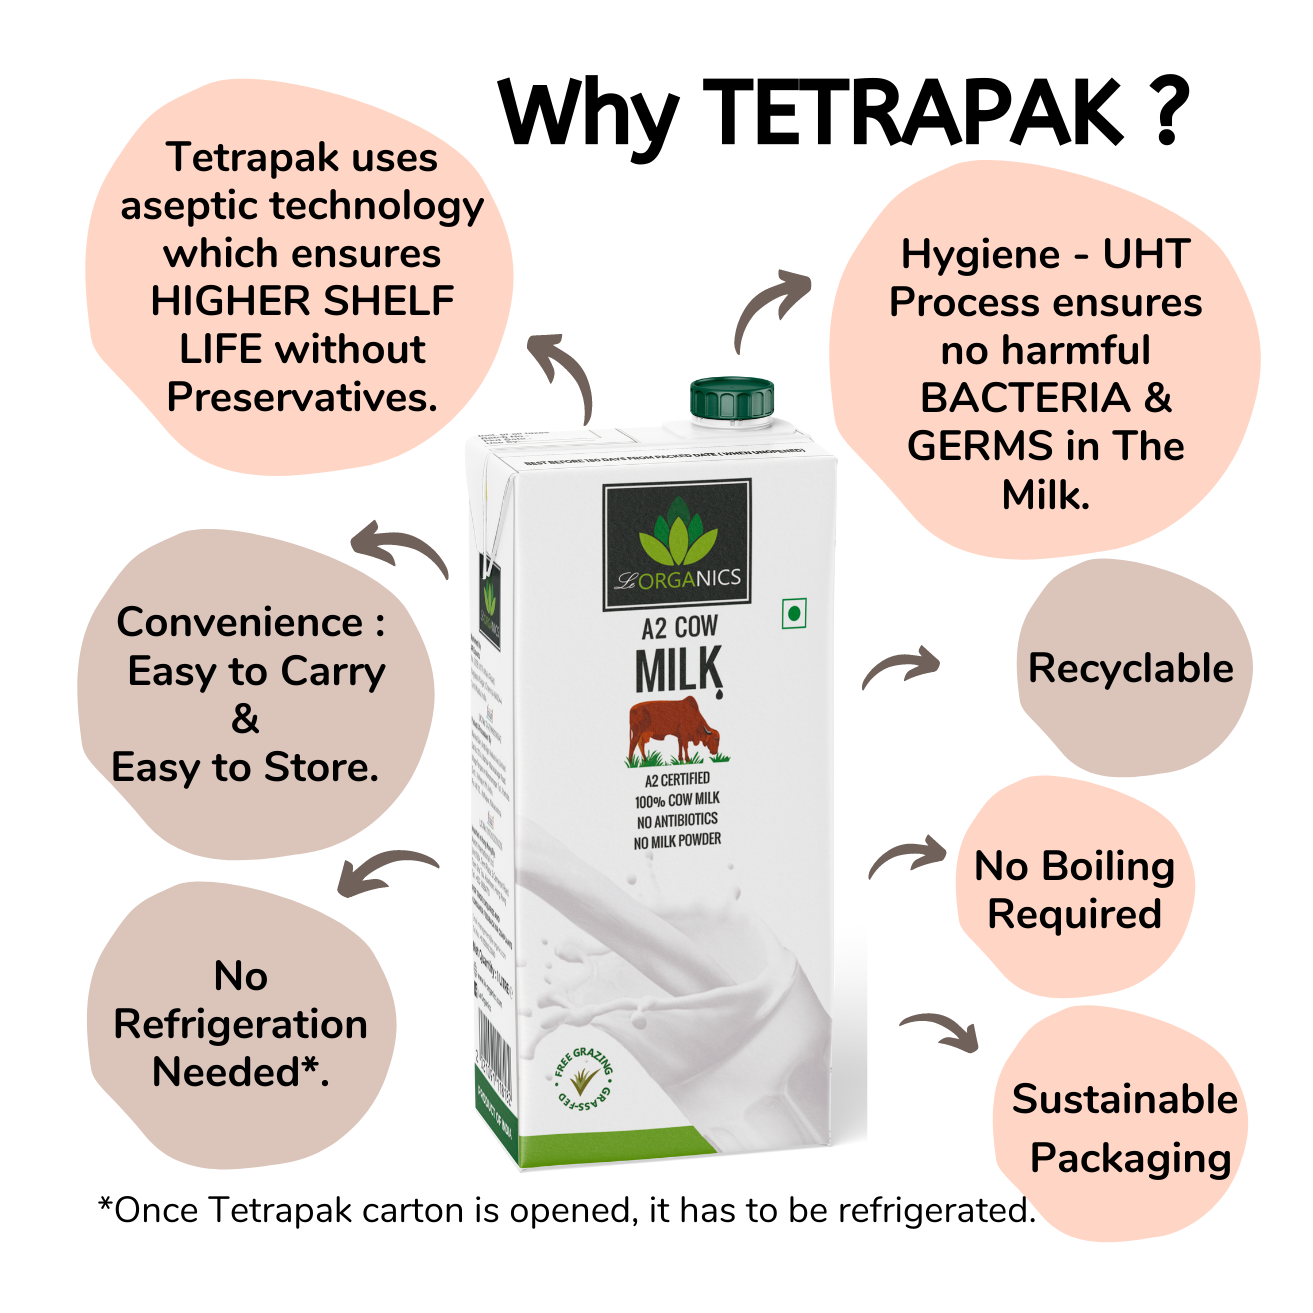 Le-Organics A2 Cow milk in Tetrapak | Pure Gir Cow Milk | UHT Treated | NO Antibiotics | Certified A2 | Pack of 12 - 1 ltr each